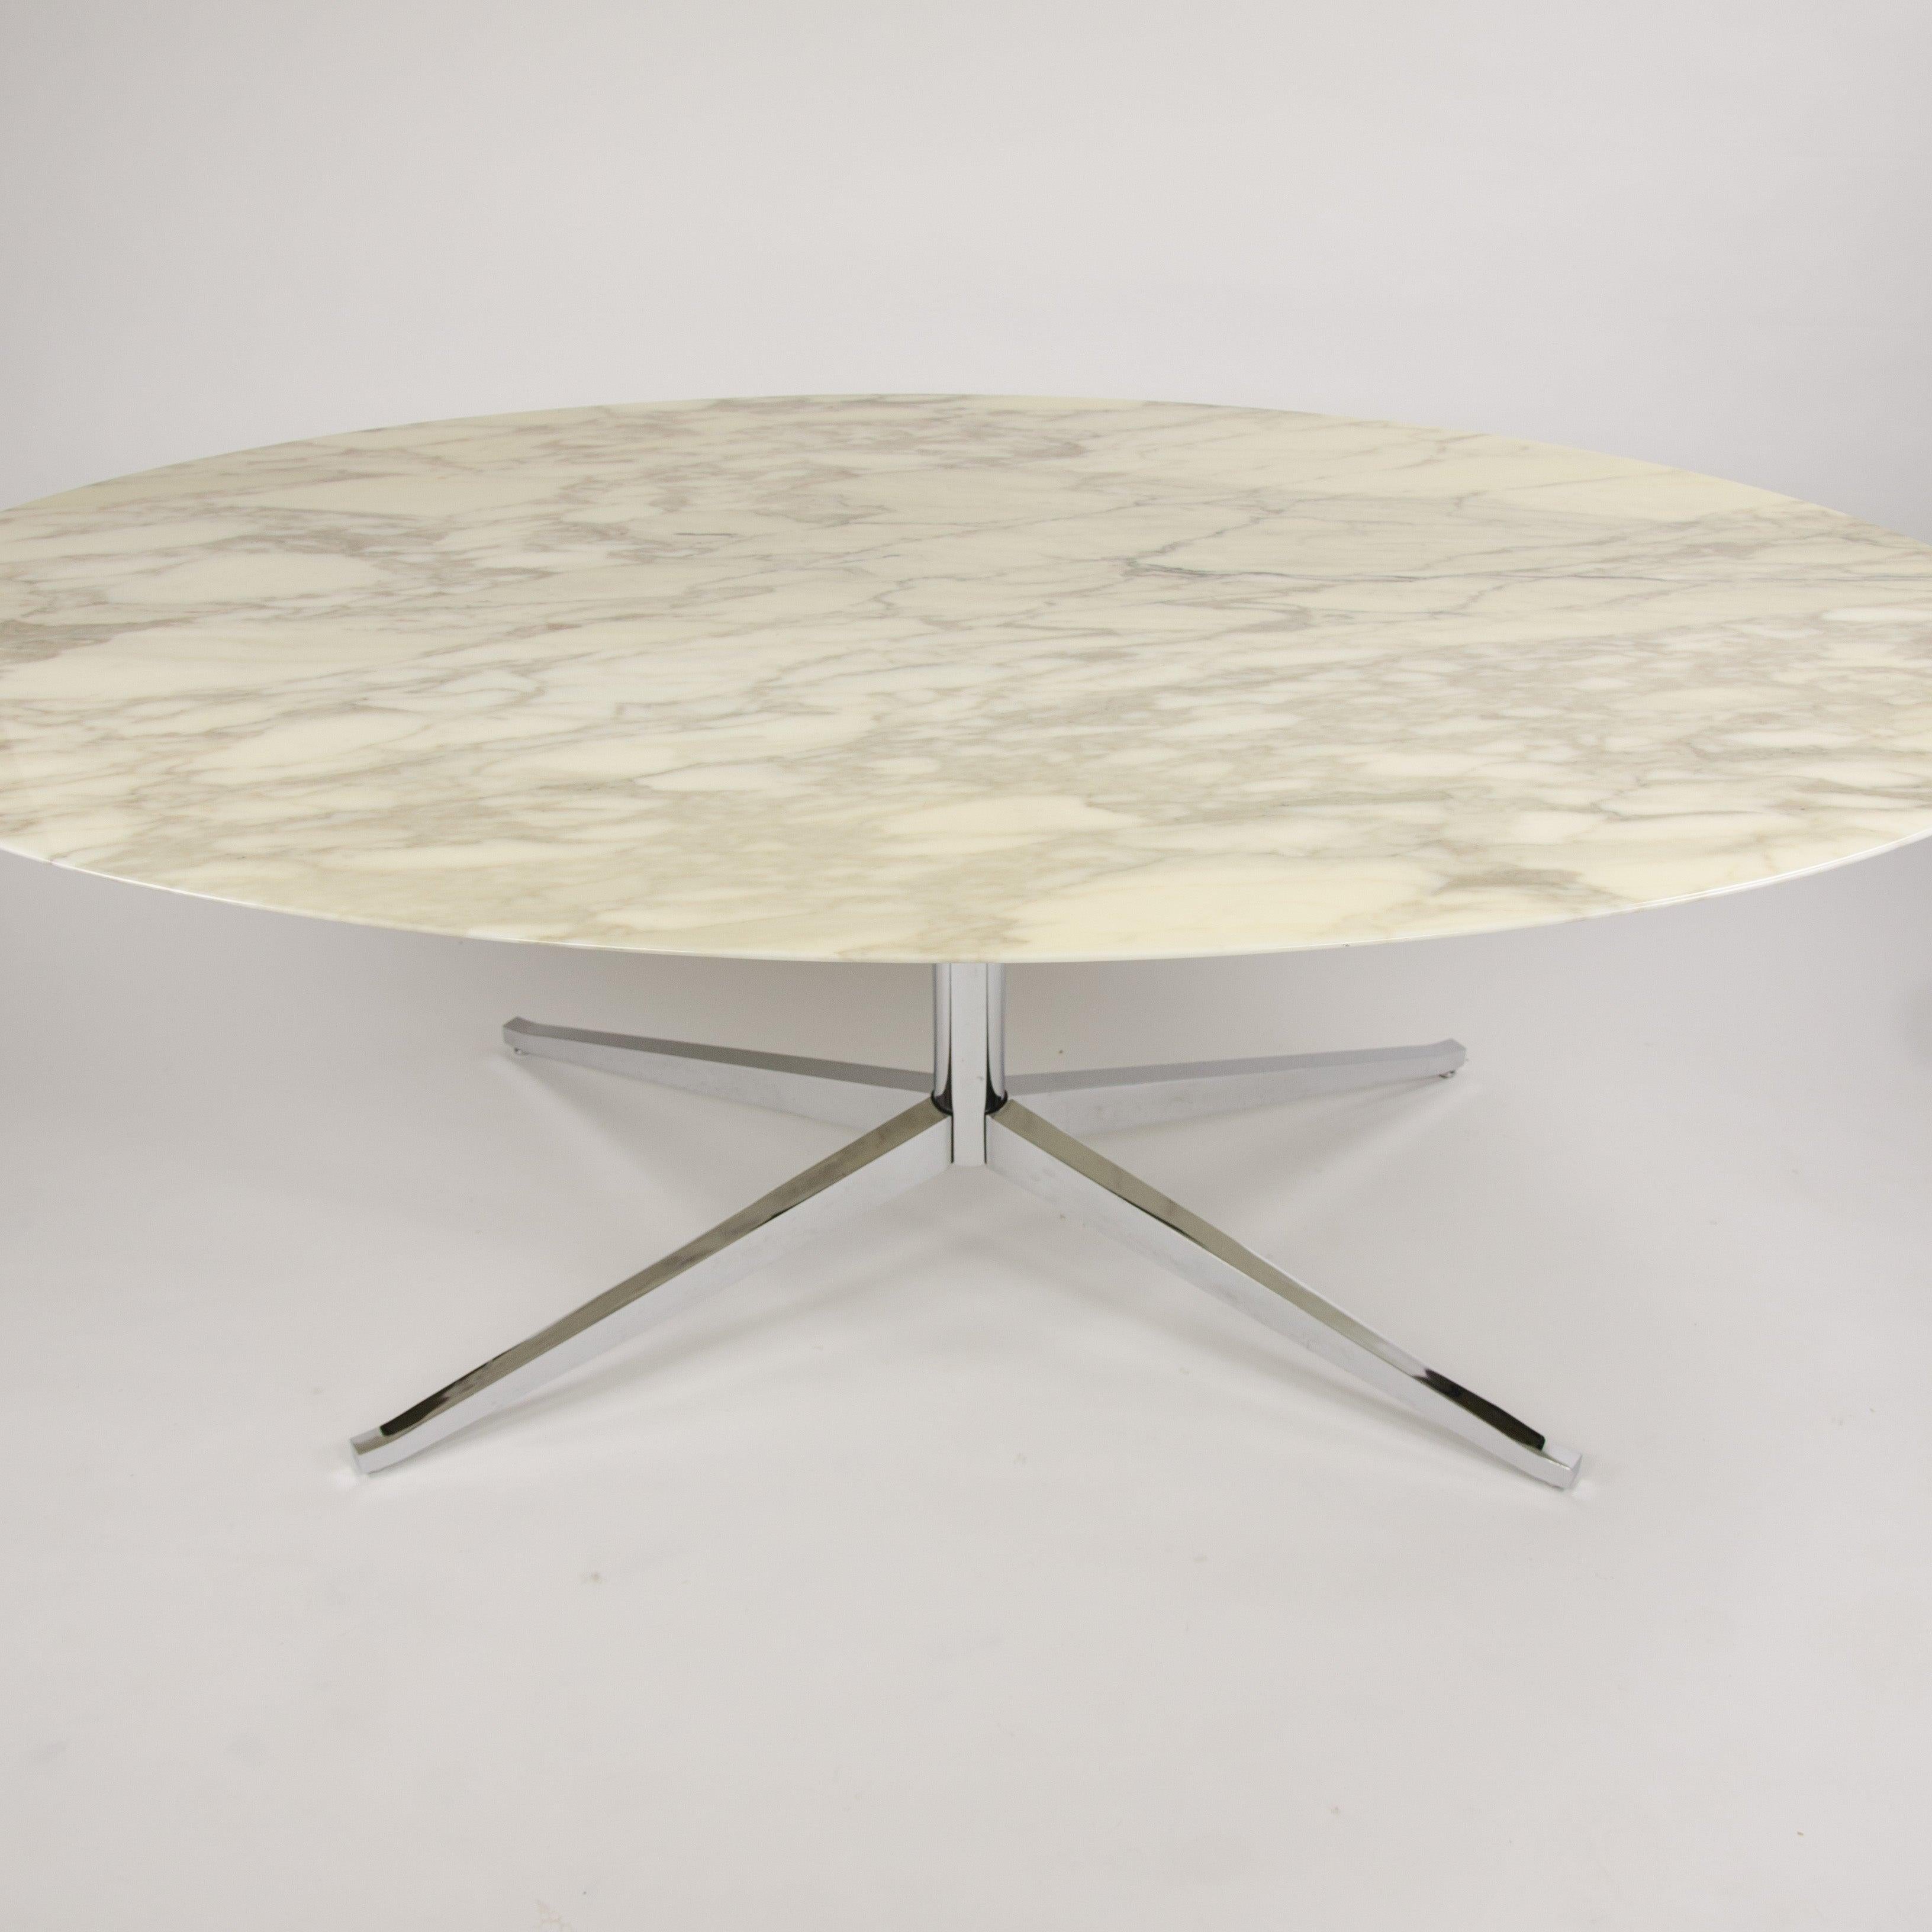 2007 Florence Knoll 78 in Calacatta Marble Dining Conference Table 2x Available For Sale 4